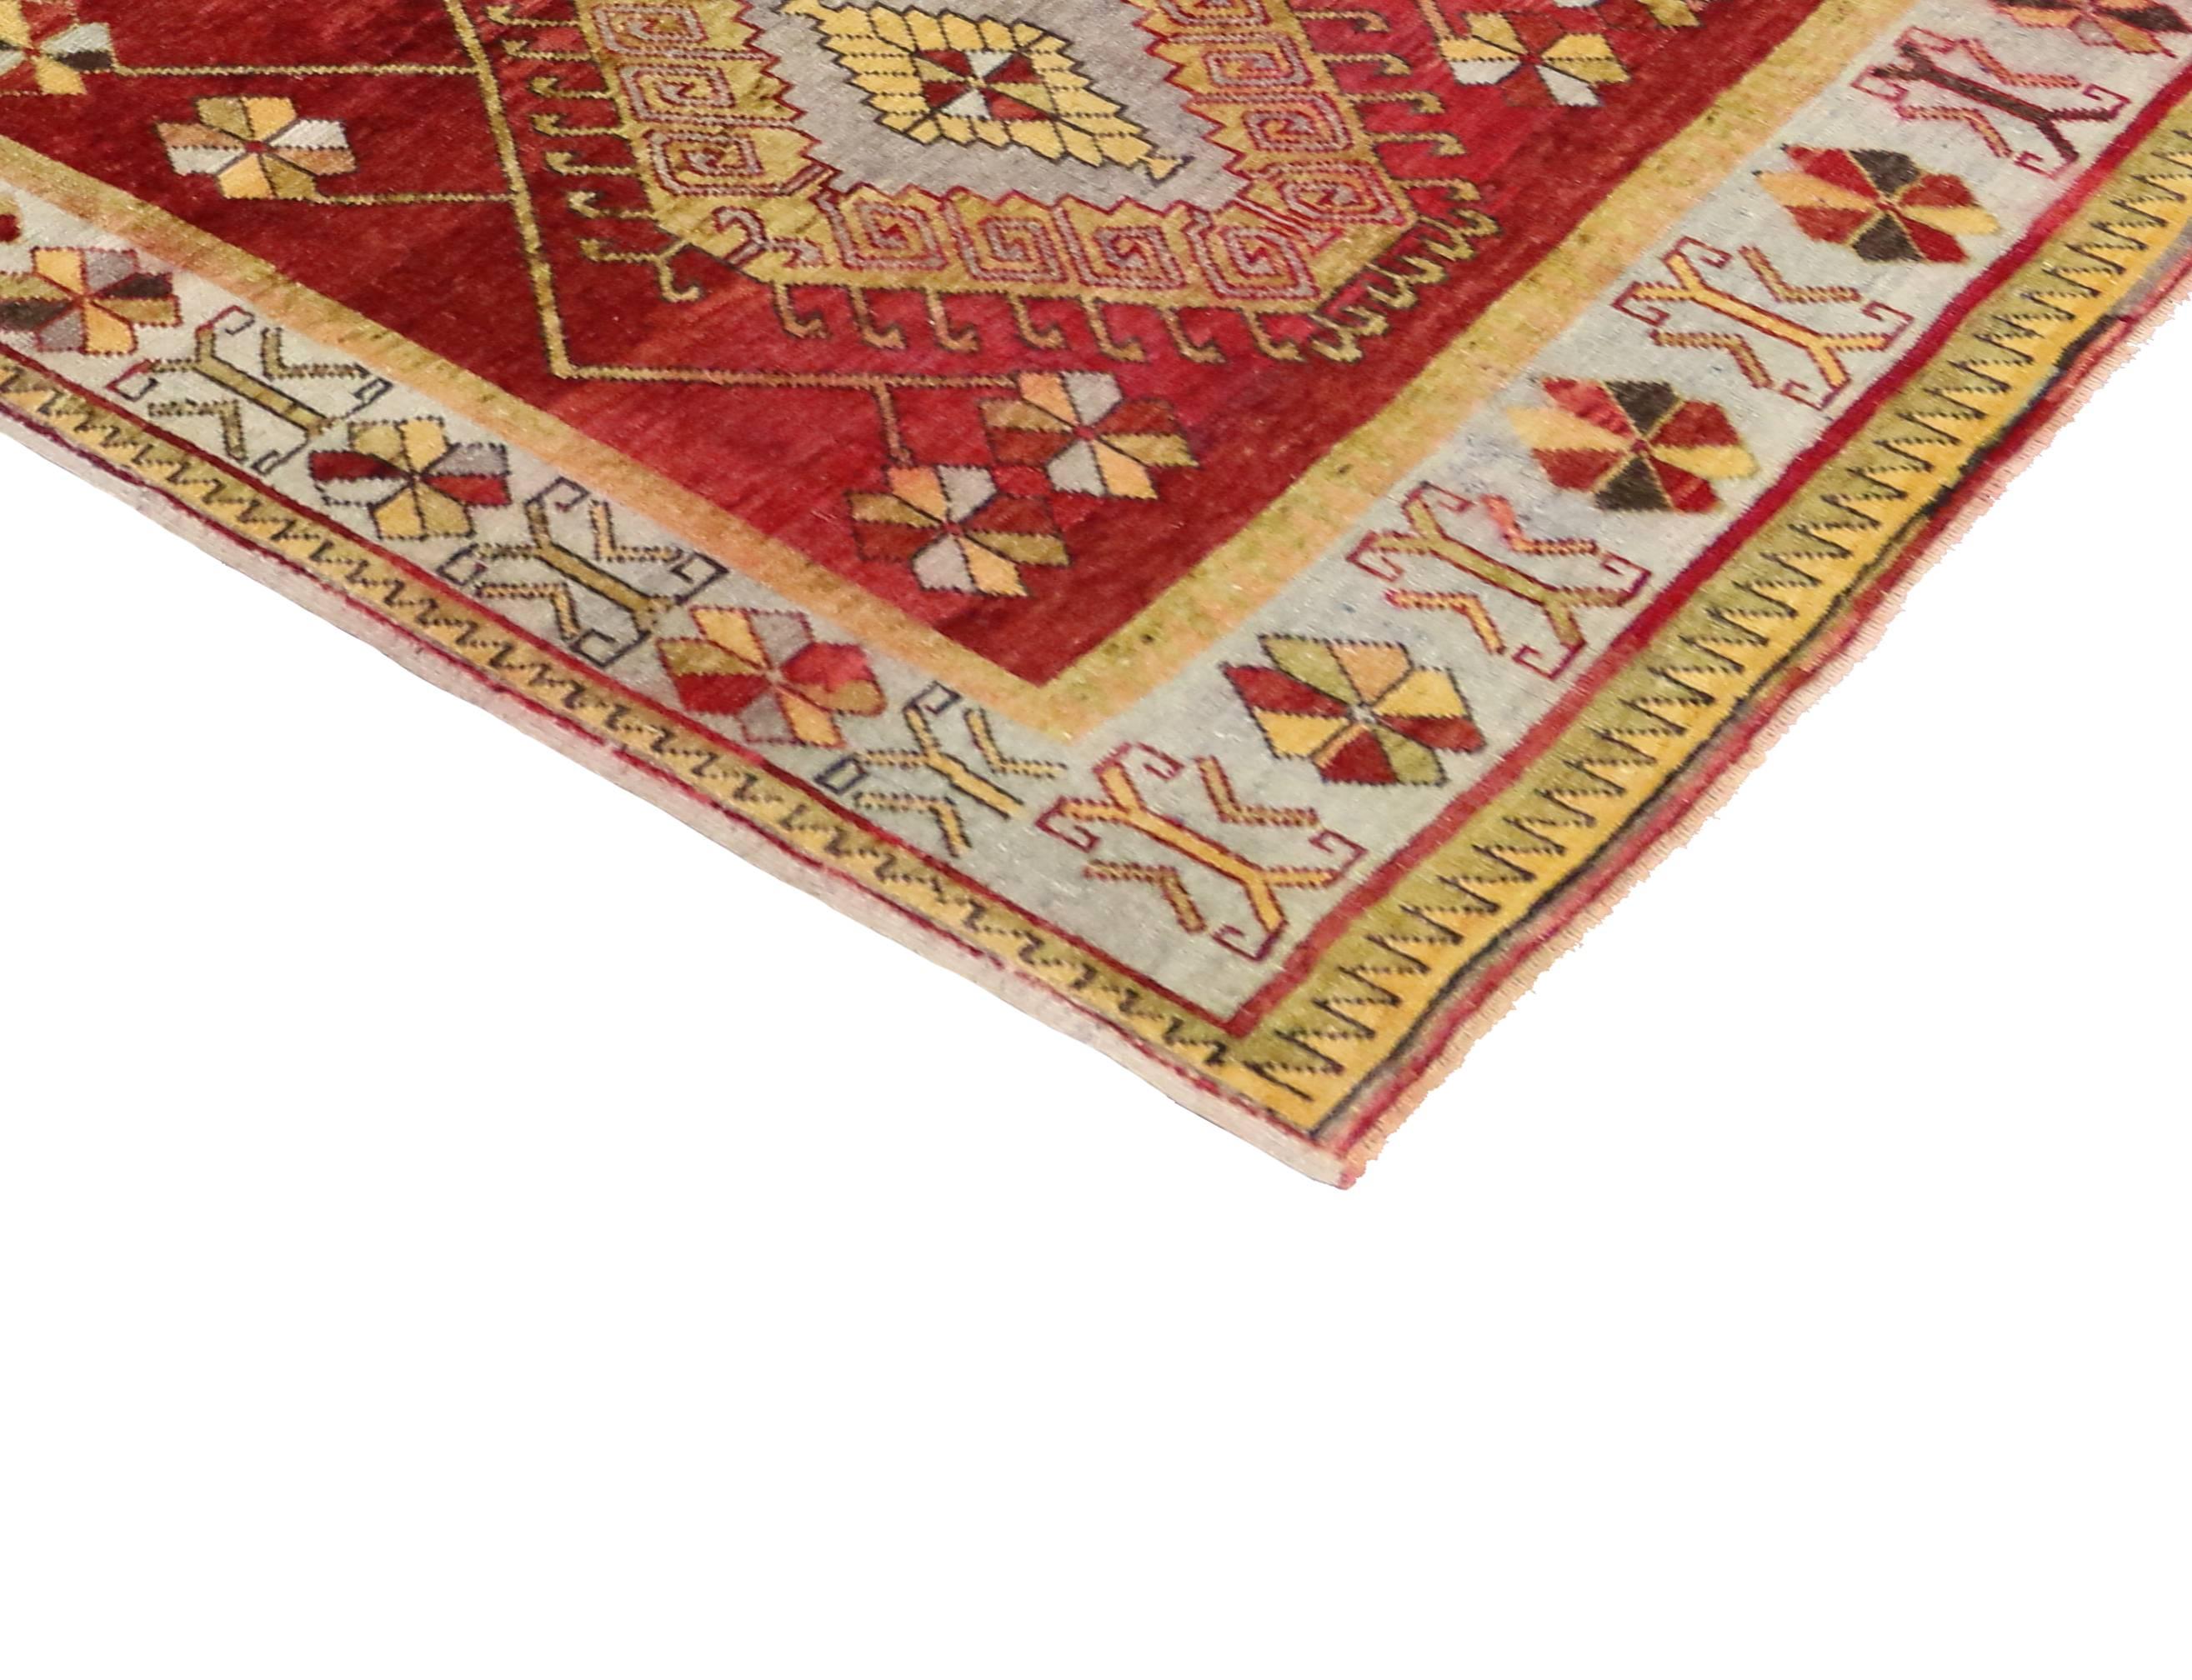 50728 Vintage Turkish Oushak Carpet Runner with Modern Tribal Style. Impeccable woven from soft, silky wool and featuring luminous colors, this vintage Turkish Oushak carpet runner is easily integrated into modern, contemporary decor and even those